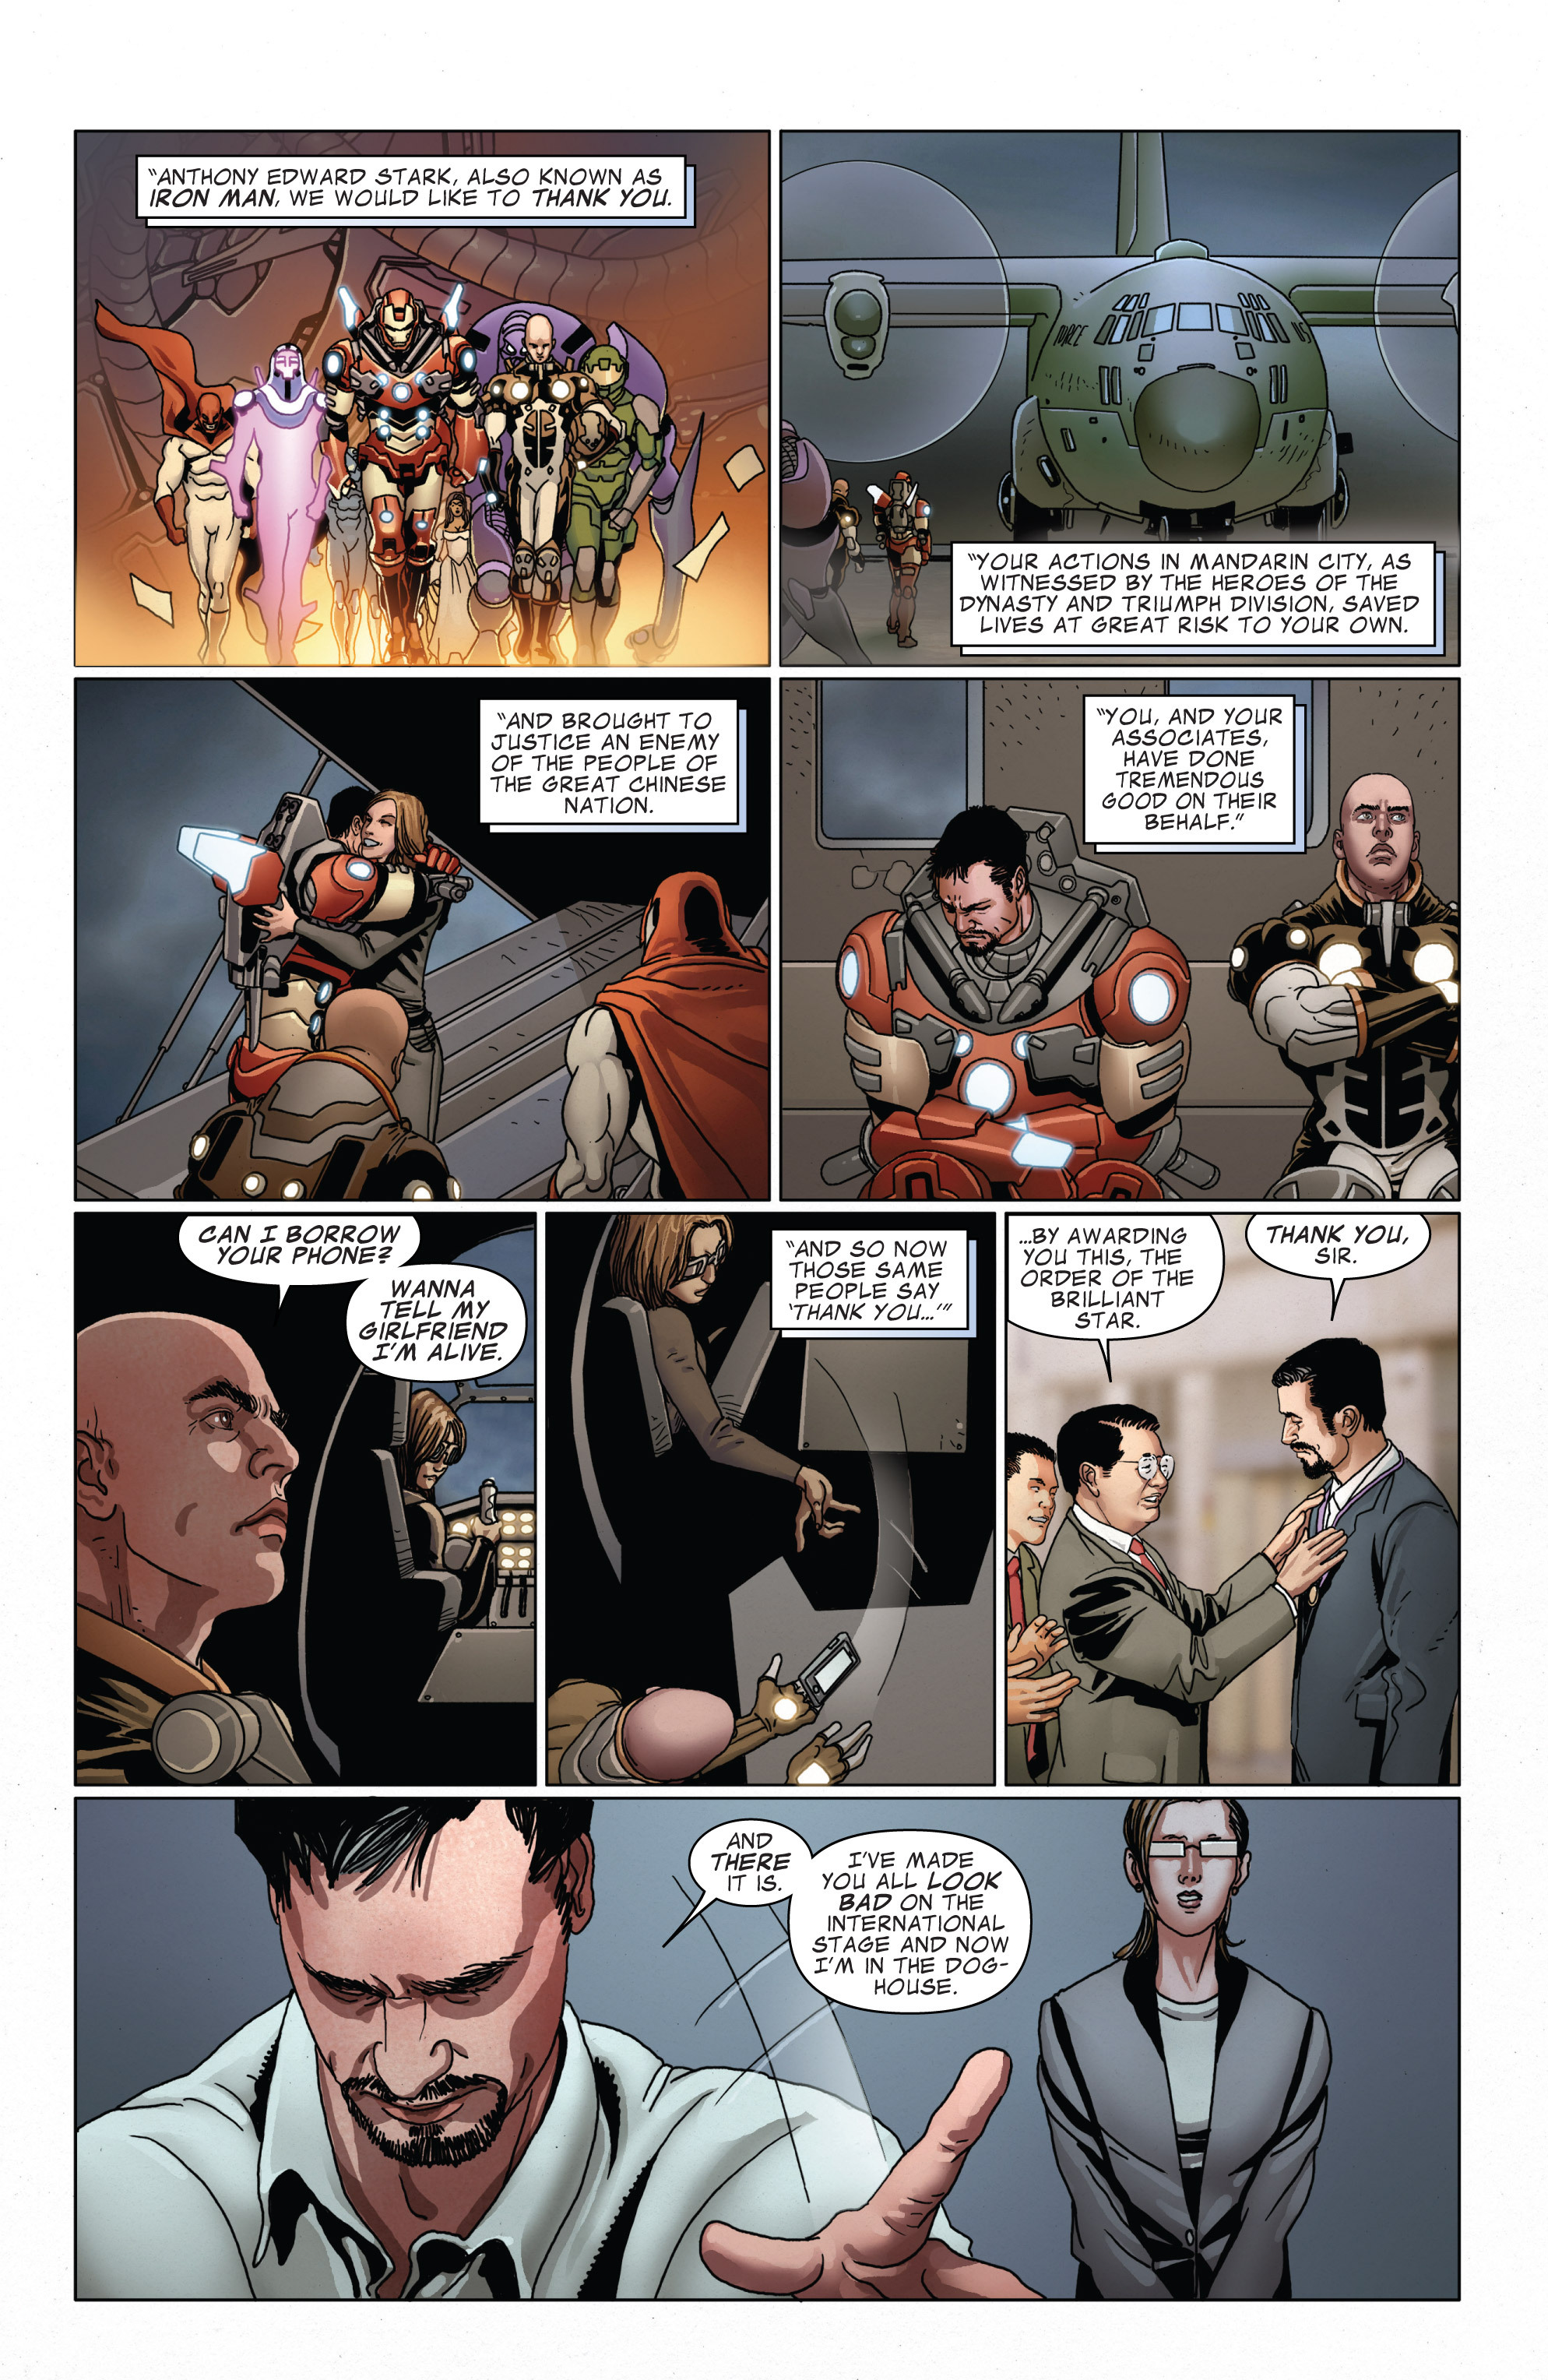 Invincible Iron Man (2008) 527 Page 7